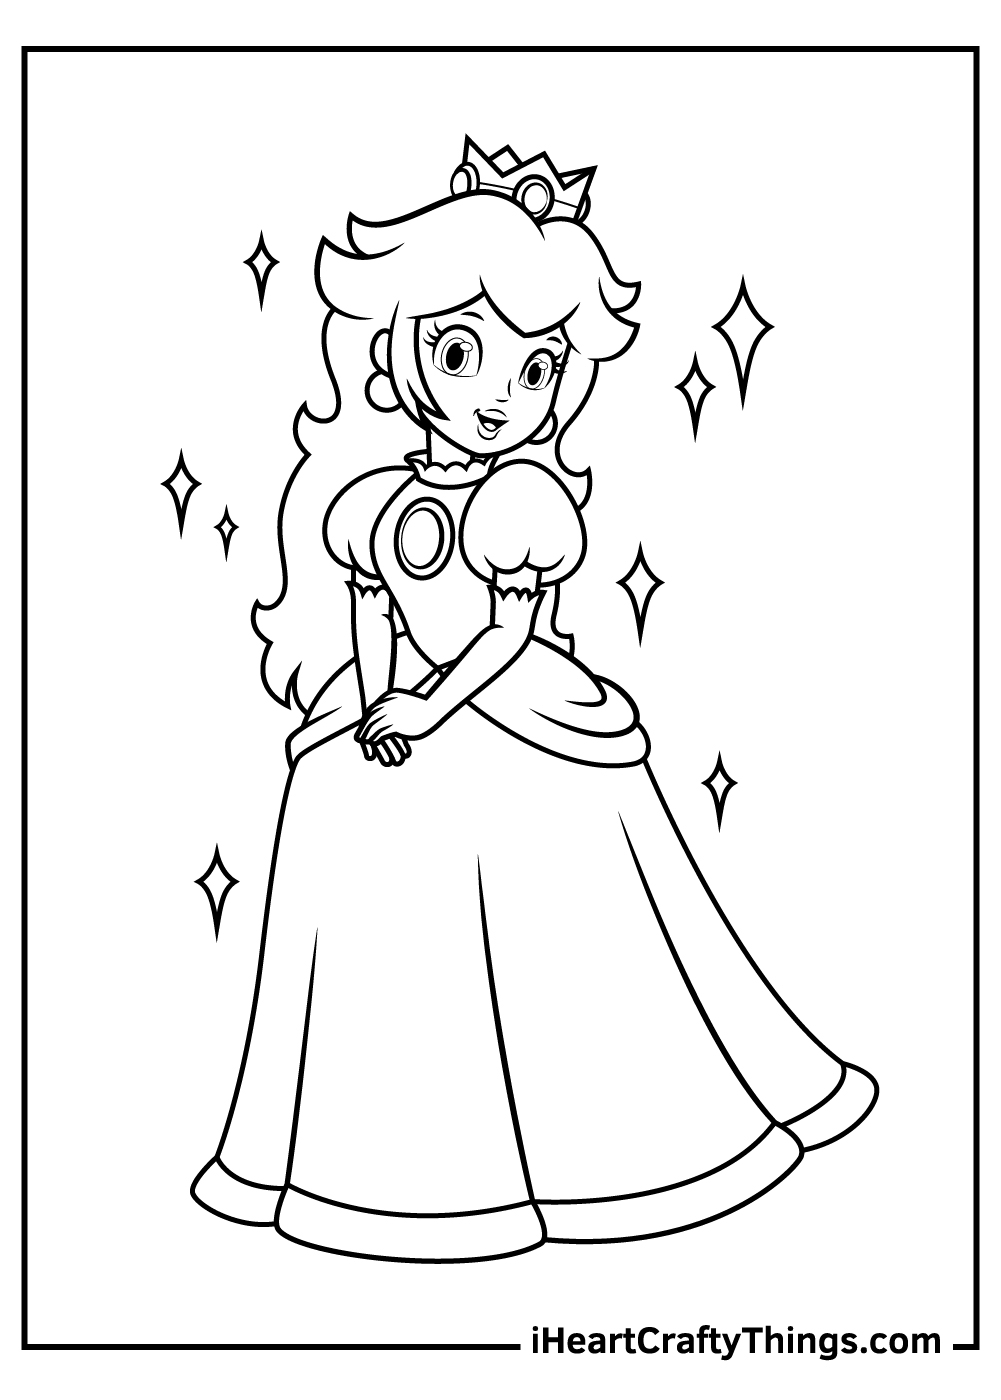 mario and princess peach coloring pages